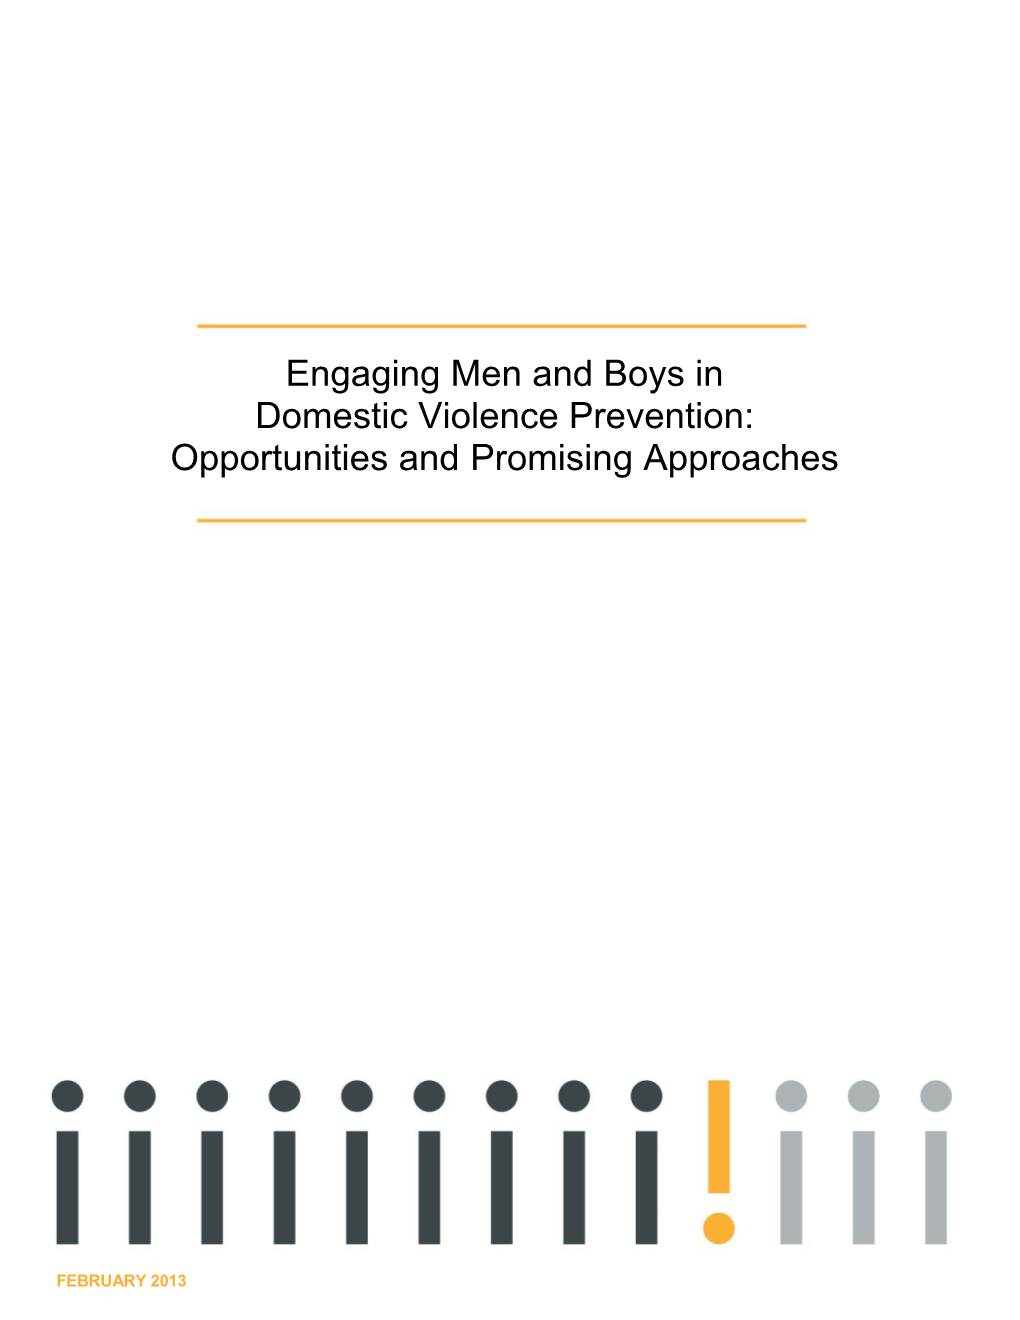 Engaging Men and Boys in Domestic Violence Prevention: Opportunities and Promising Approaches